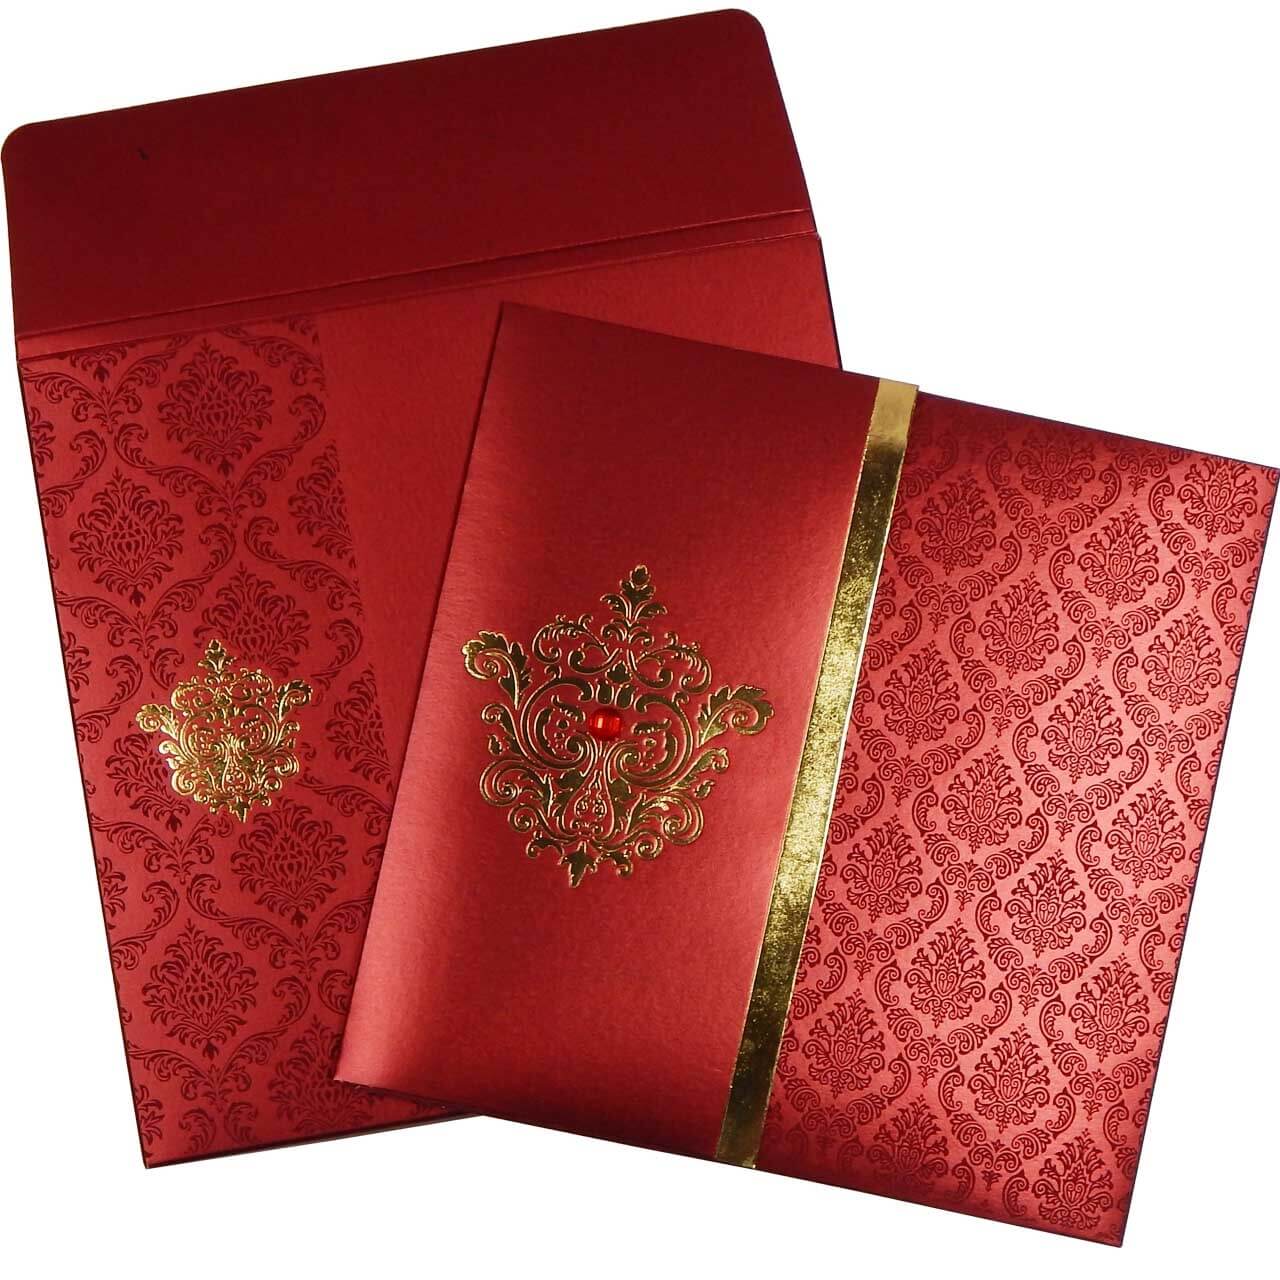 The Wedding Cards Online | Indian Wedding Cards: Tips for having an